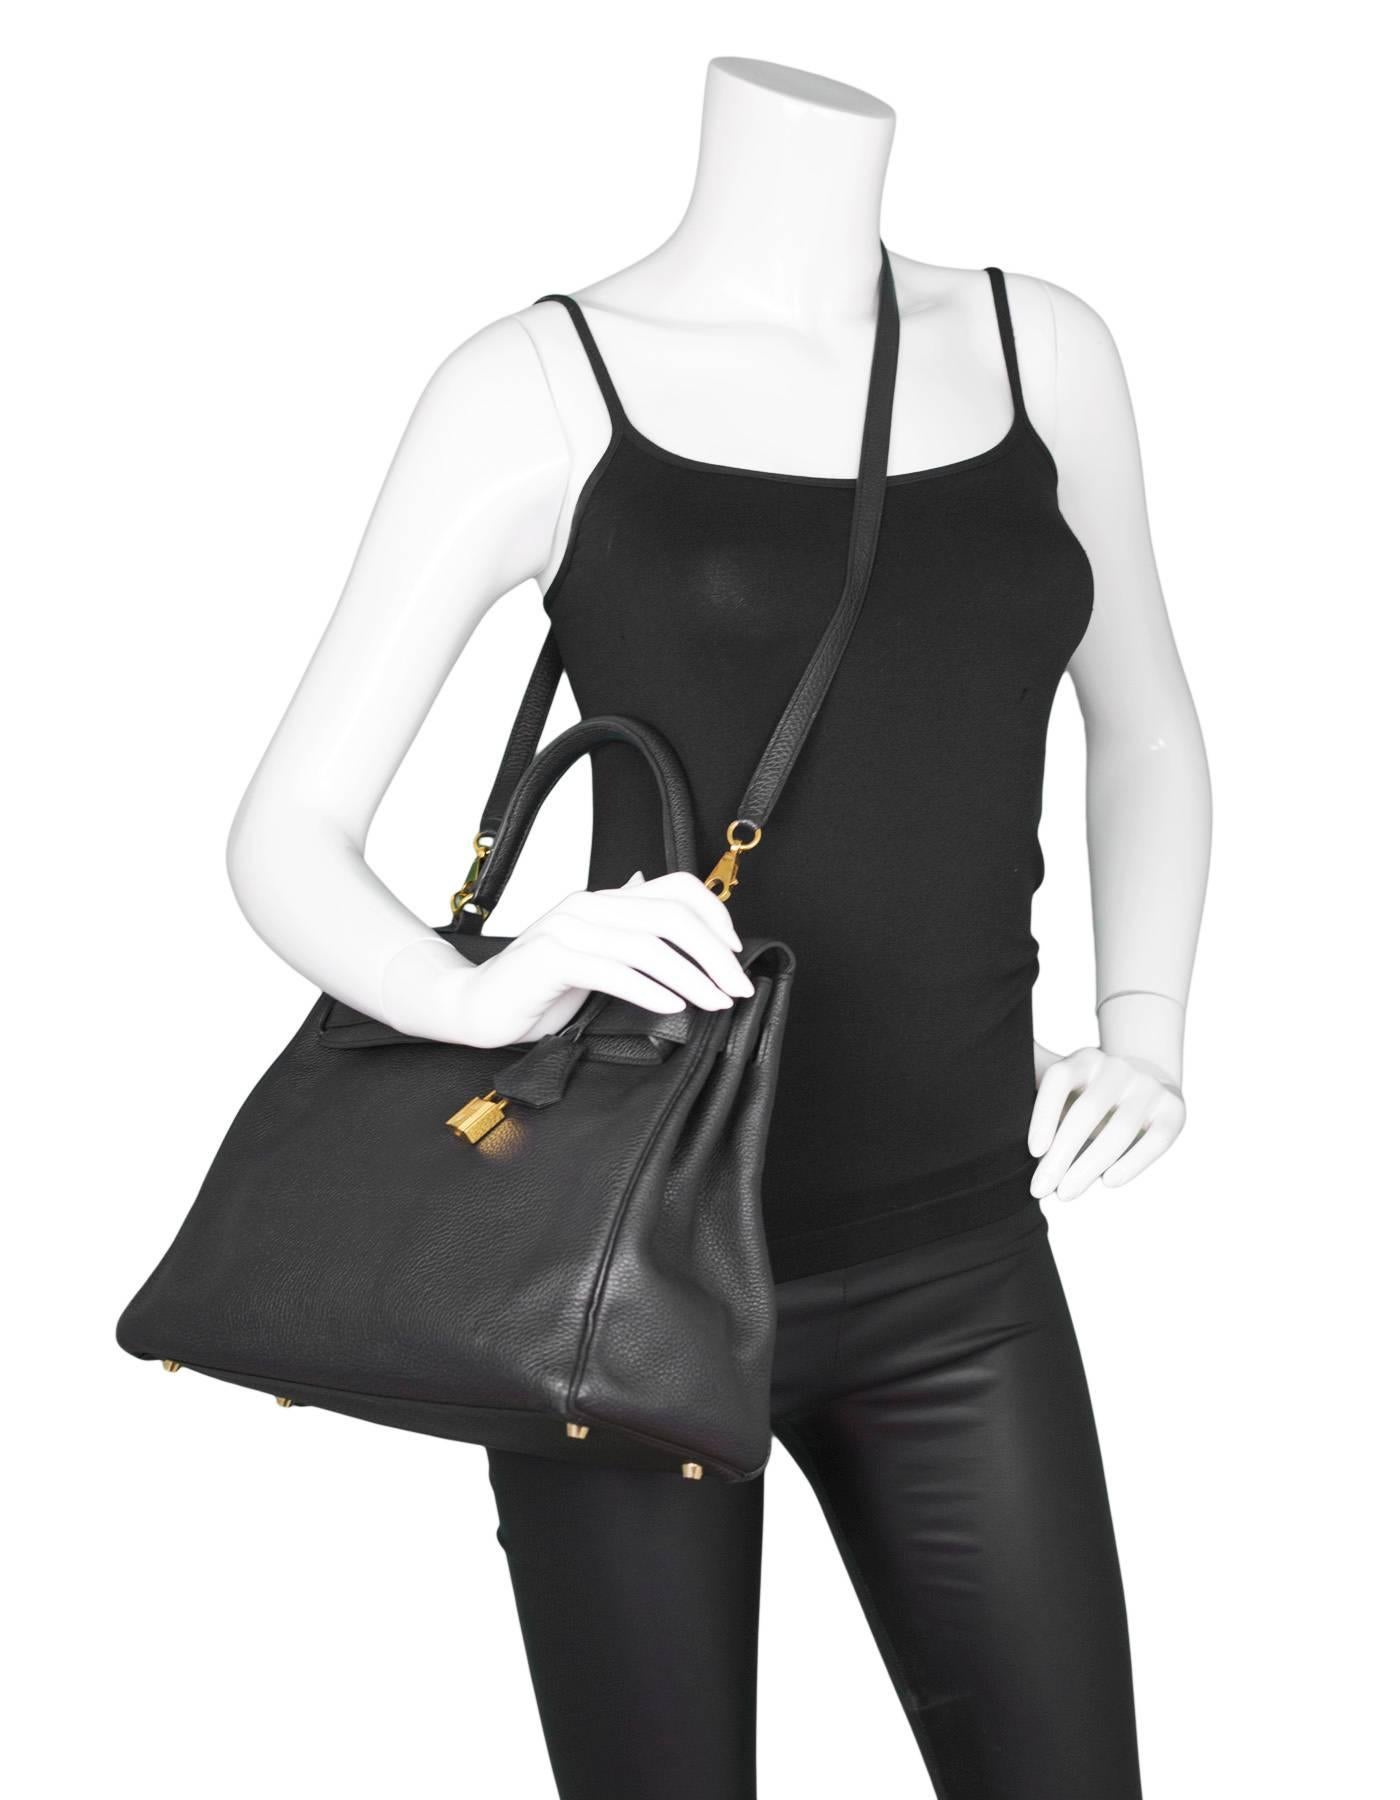 Hermes Black Togo 35cm Kelly Bag 
Features removable shoulder/crossbody strap

Made In: France
Year of Production: 2013
Color: Black
Hardware: Goldtone
Materials: Togo leather, metal
Lining: Black leather
Closure/opening: Flap top with two leather